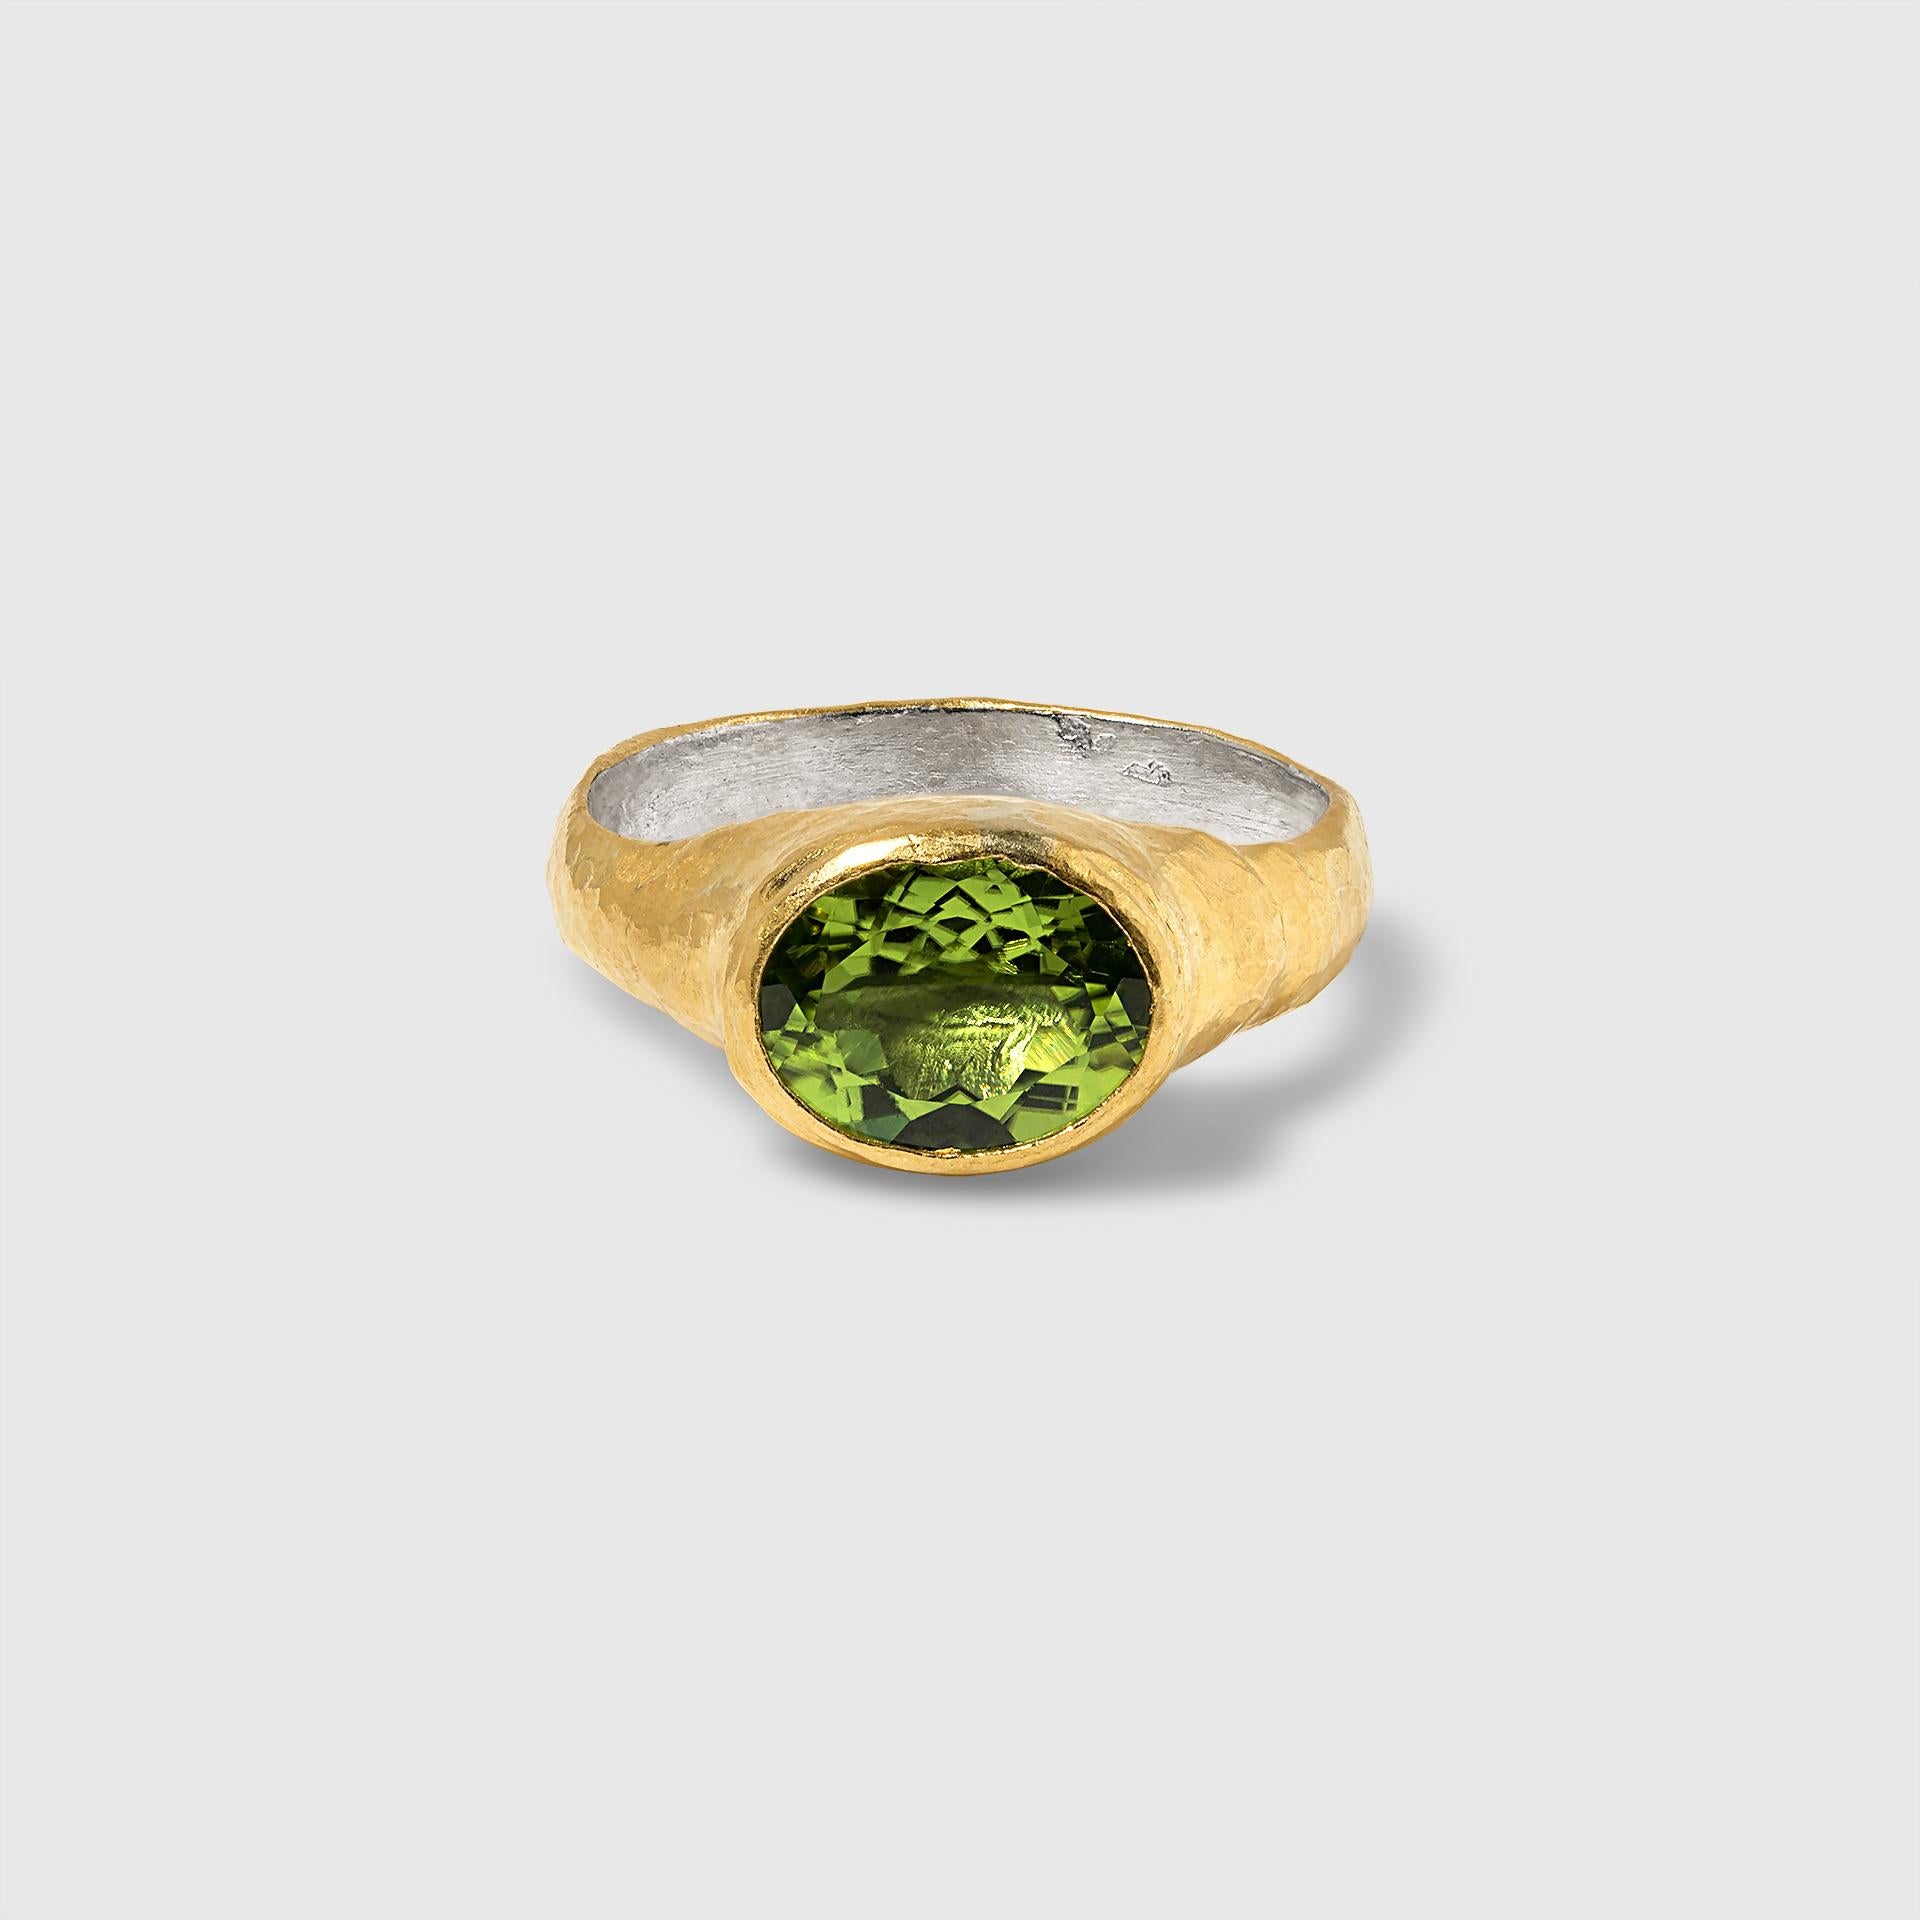 Oval Cut 2.75ct Oval Peridot Ring with 24kt and Silver For Sale